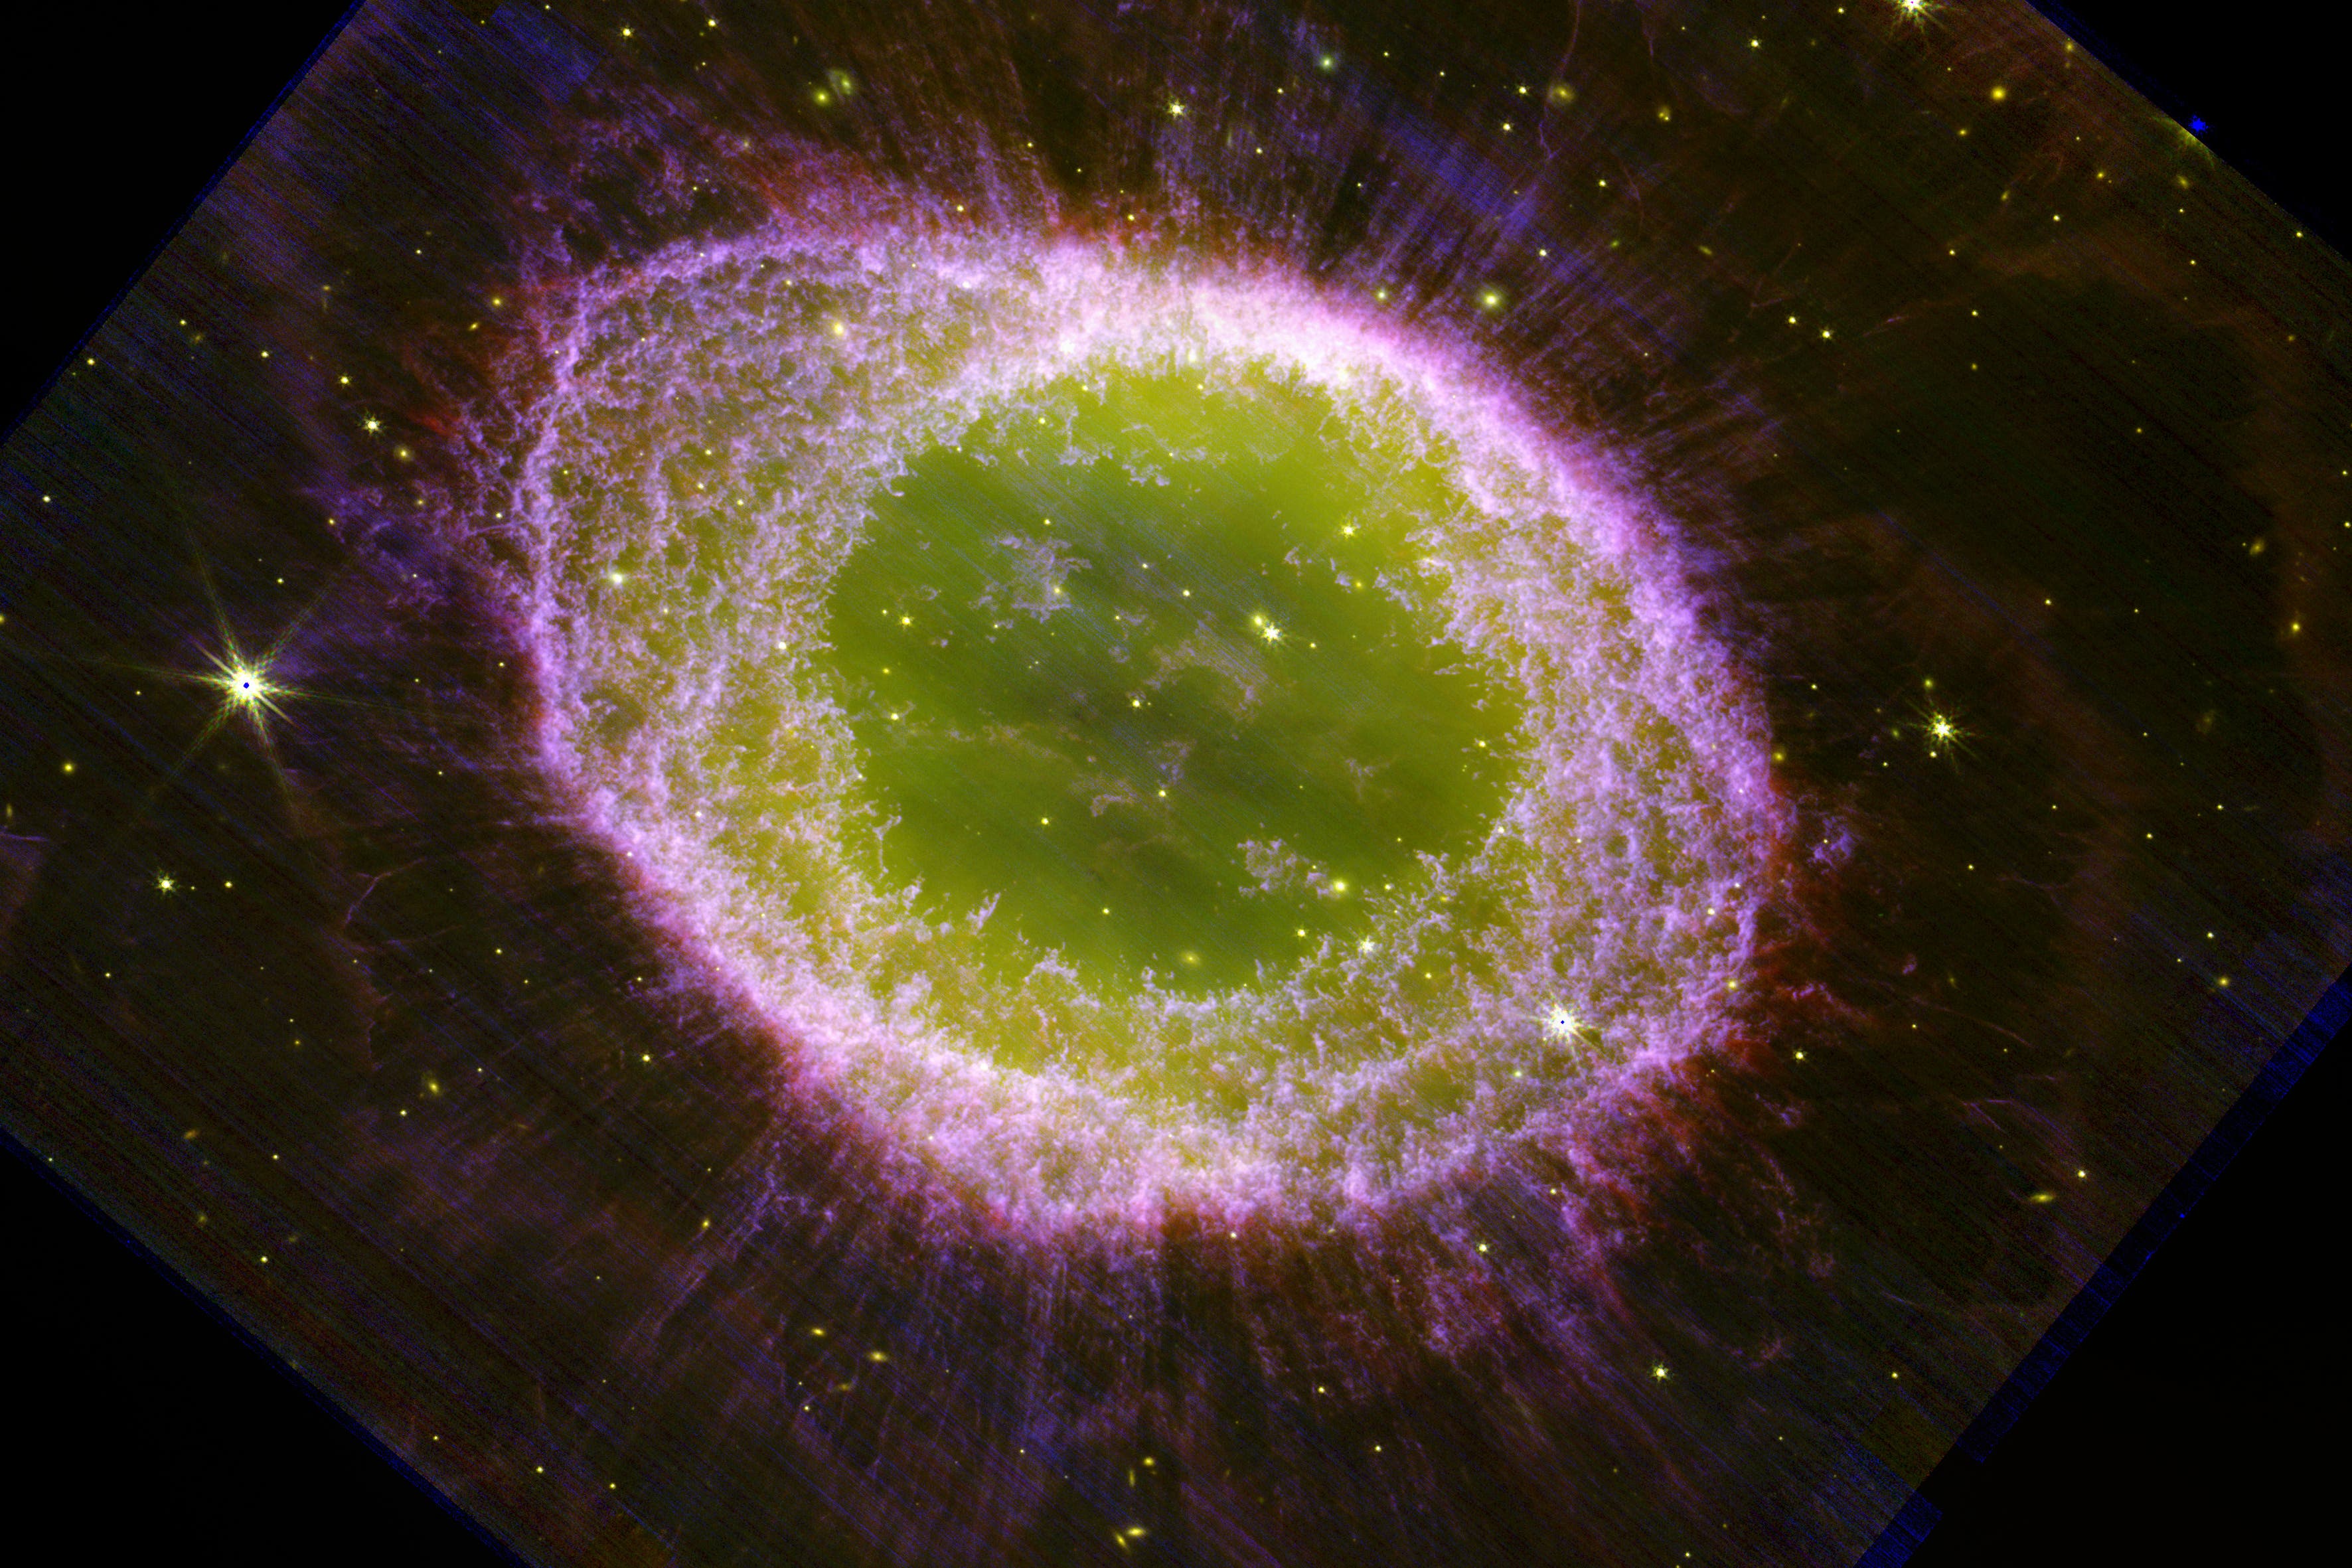 James Webb Space Telescope Captures New Images Of The Ring Nebula The